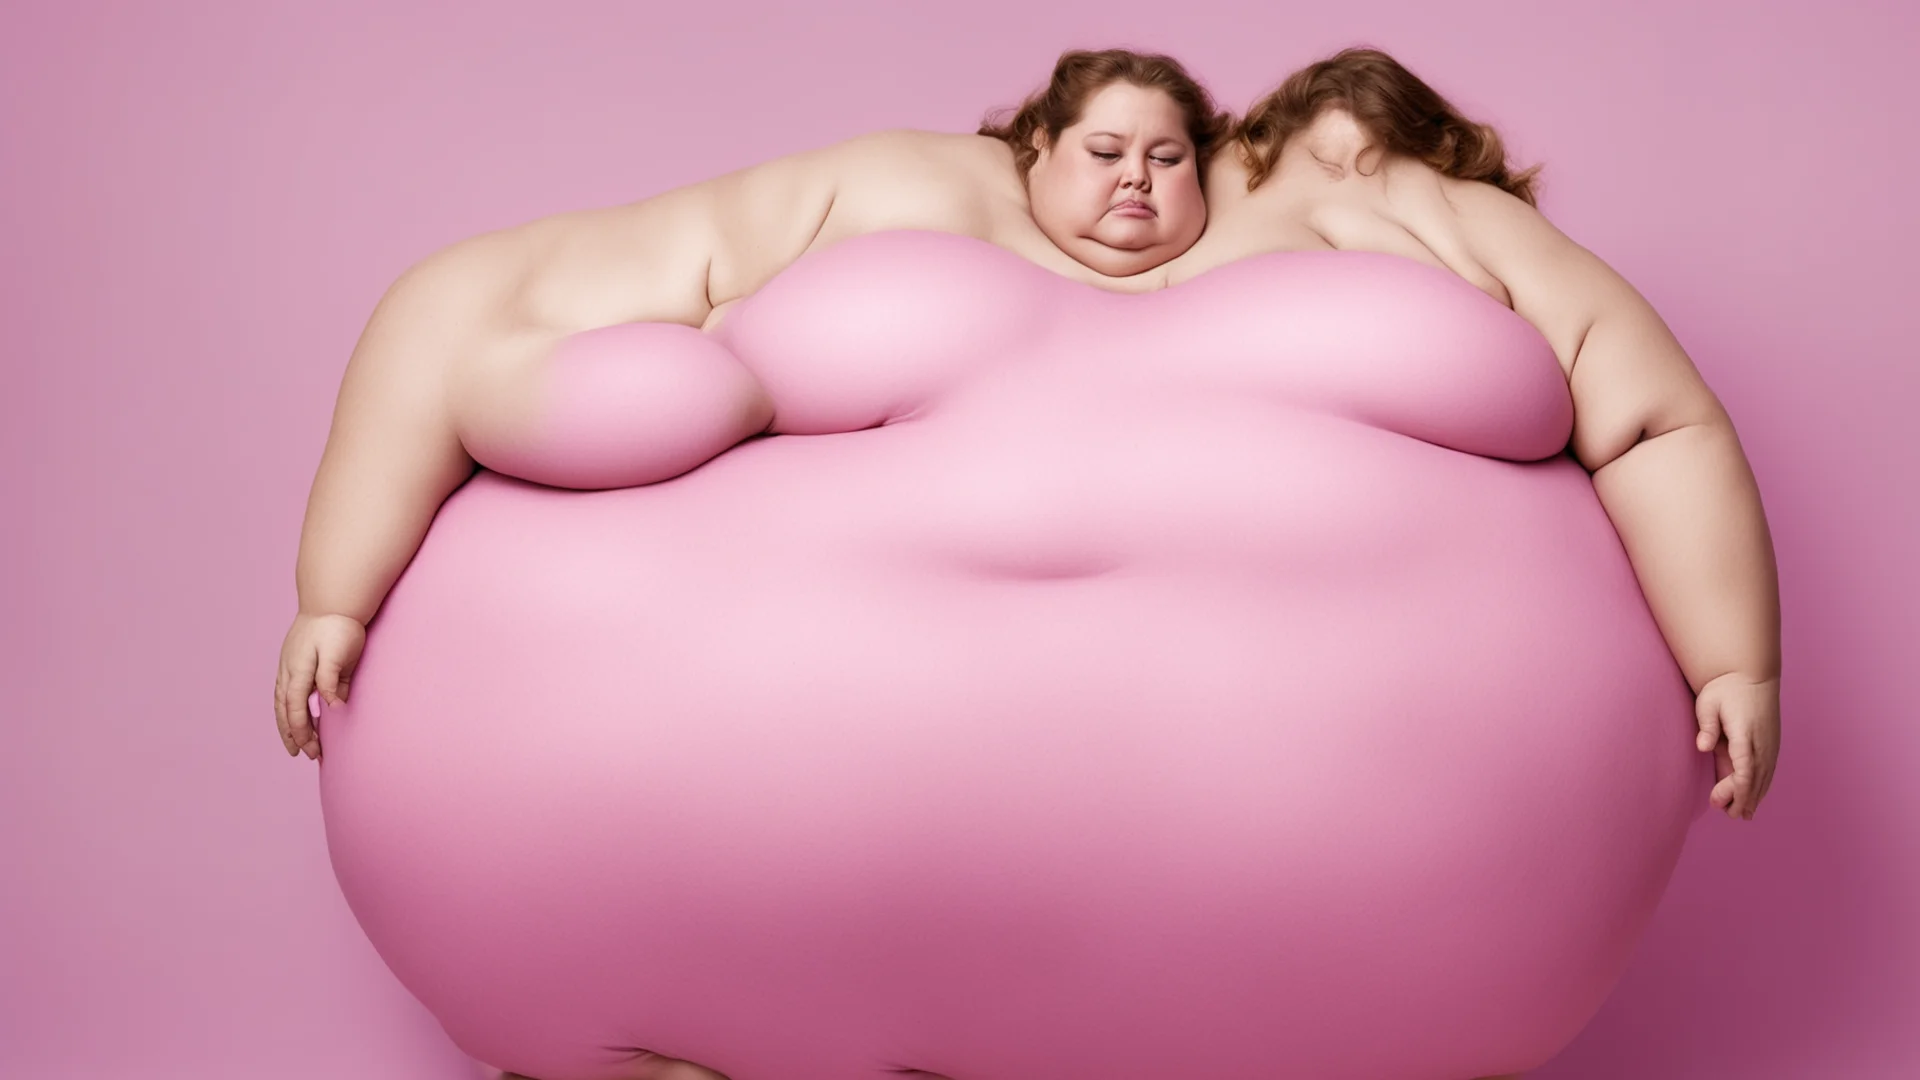 ultra morbidly obese young girl amazing awesome portrait 2 wide